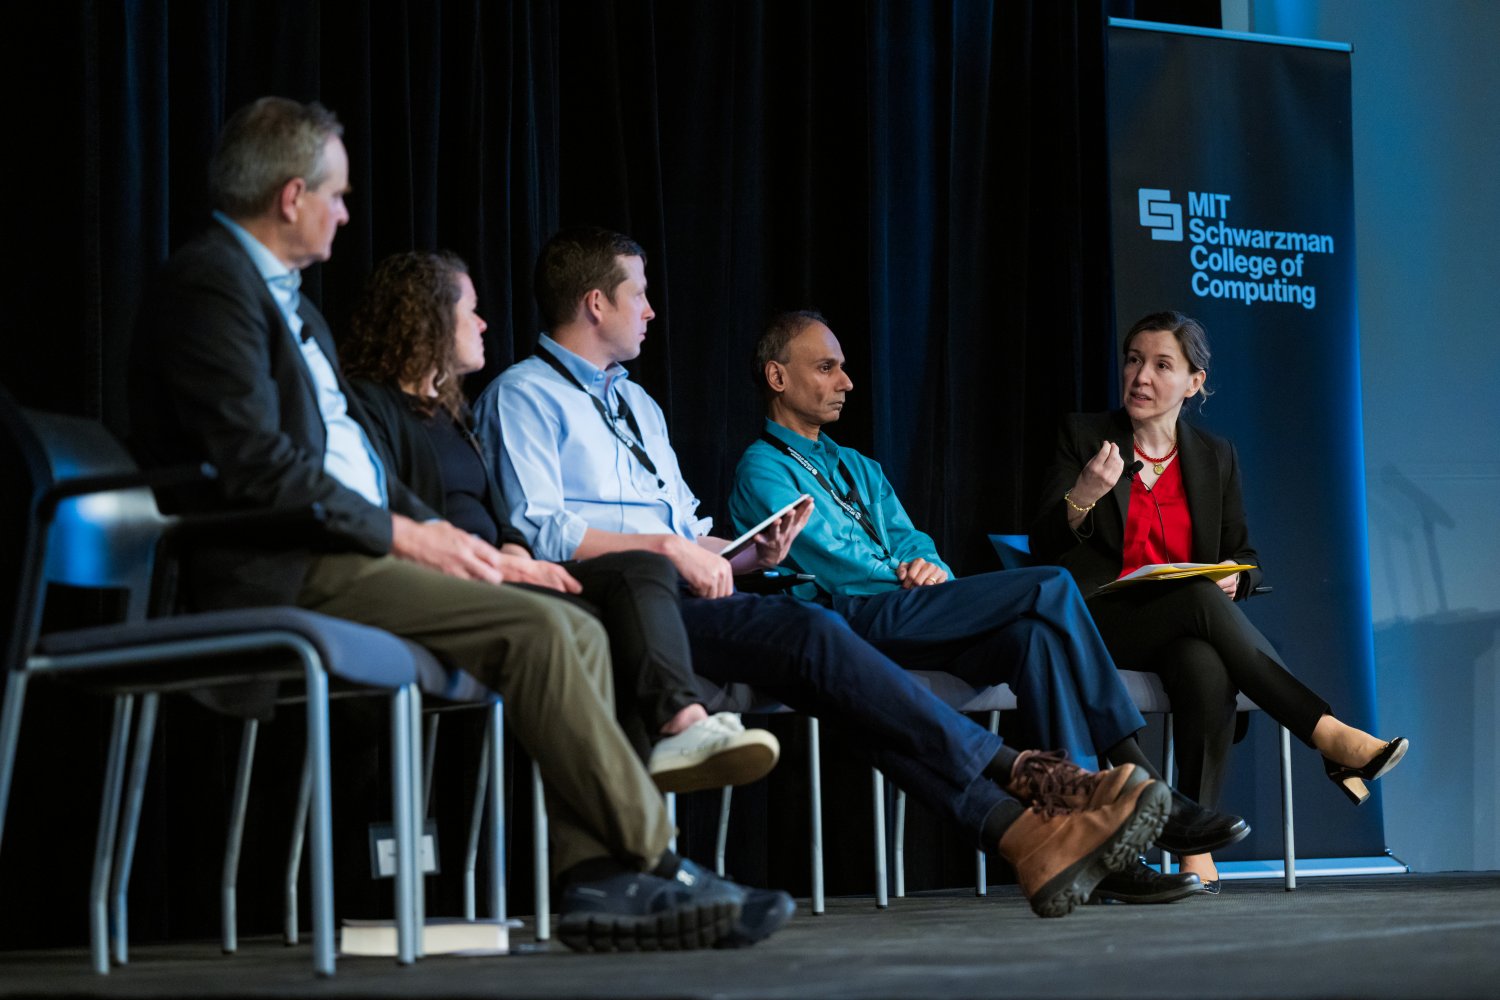 Bringing the social and moral duties of computing to the forefront | MIT News